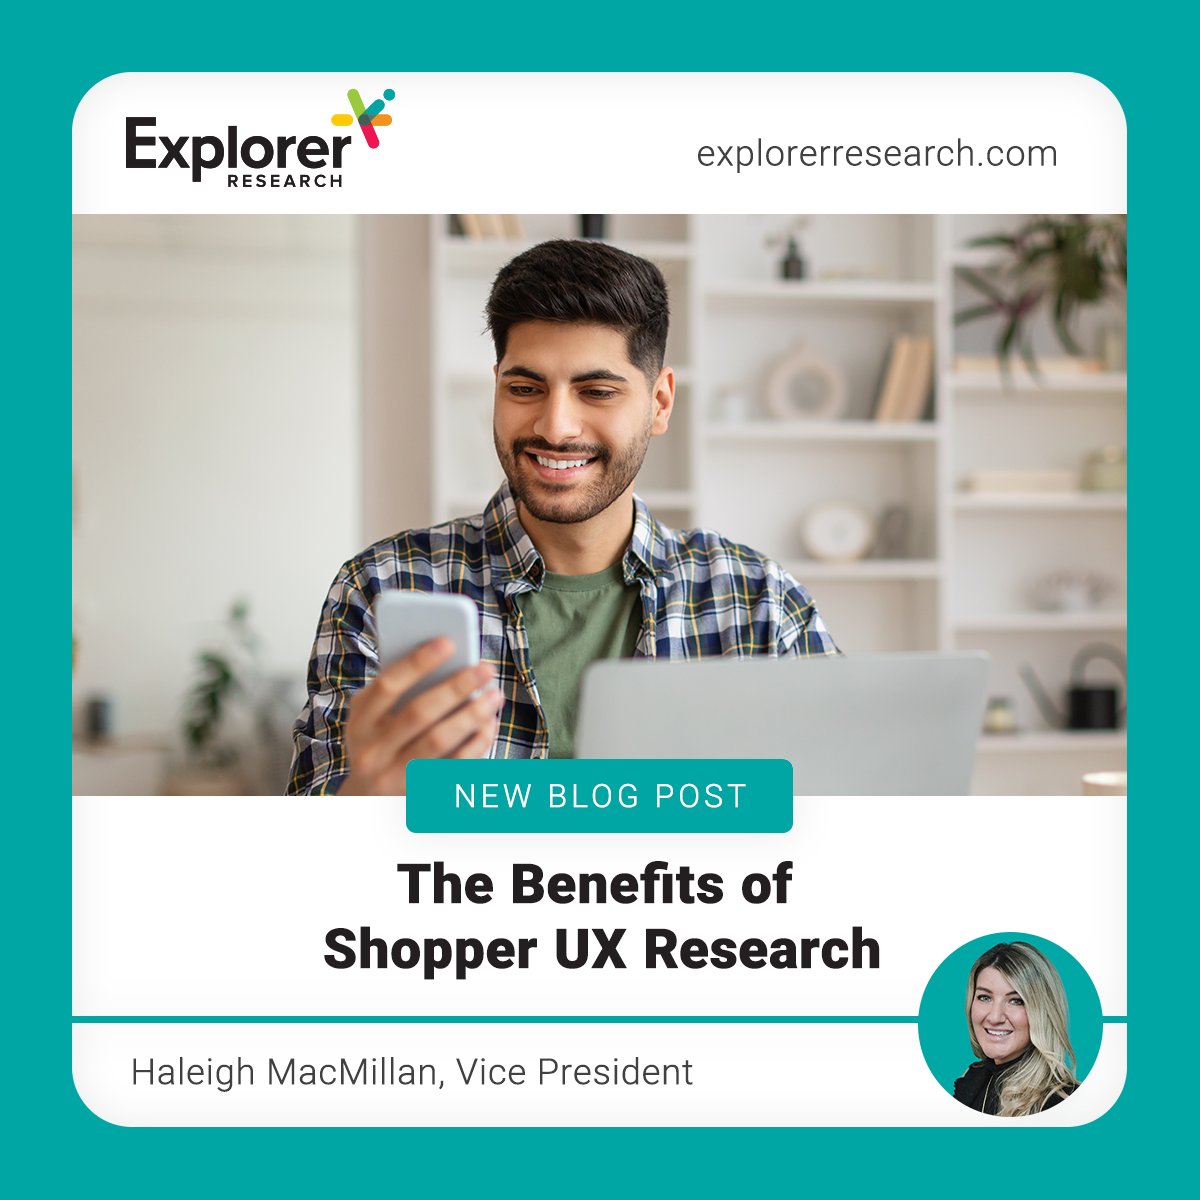 By going beyond surface-level data, researchers gain in-depth behavioral measurements and uncover the 'why' behind user actions.

hubs.li/Q01S5LKX0

#ExplorerResearch #MarketResearch #mrx #Research #Insights #Innovation #BehavioralResearch #UserExperienceResearch #UX